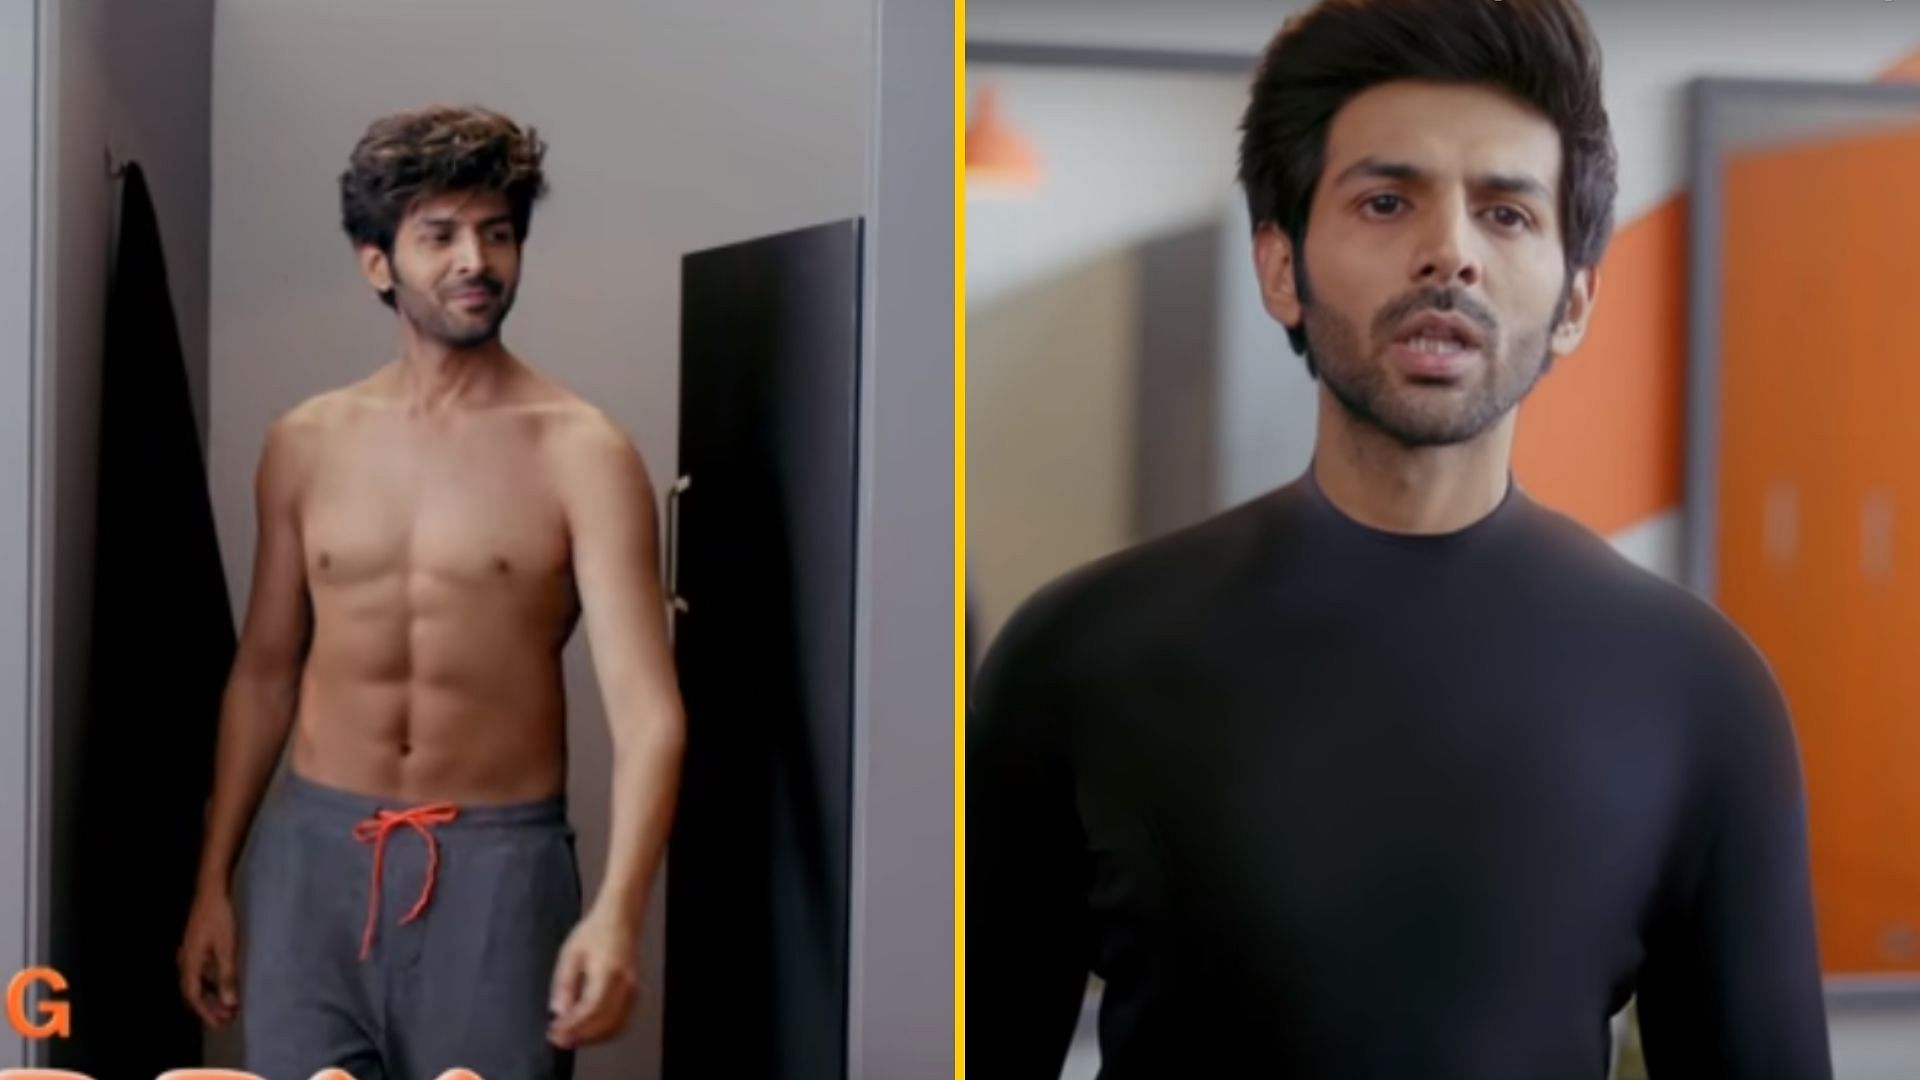 Kartik Aaryan recently starred in an advertisement that was heavily criticised.&nbsp;